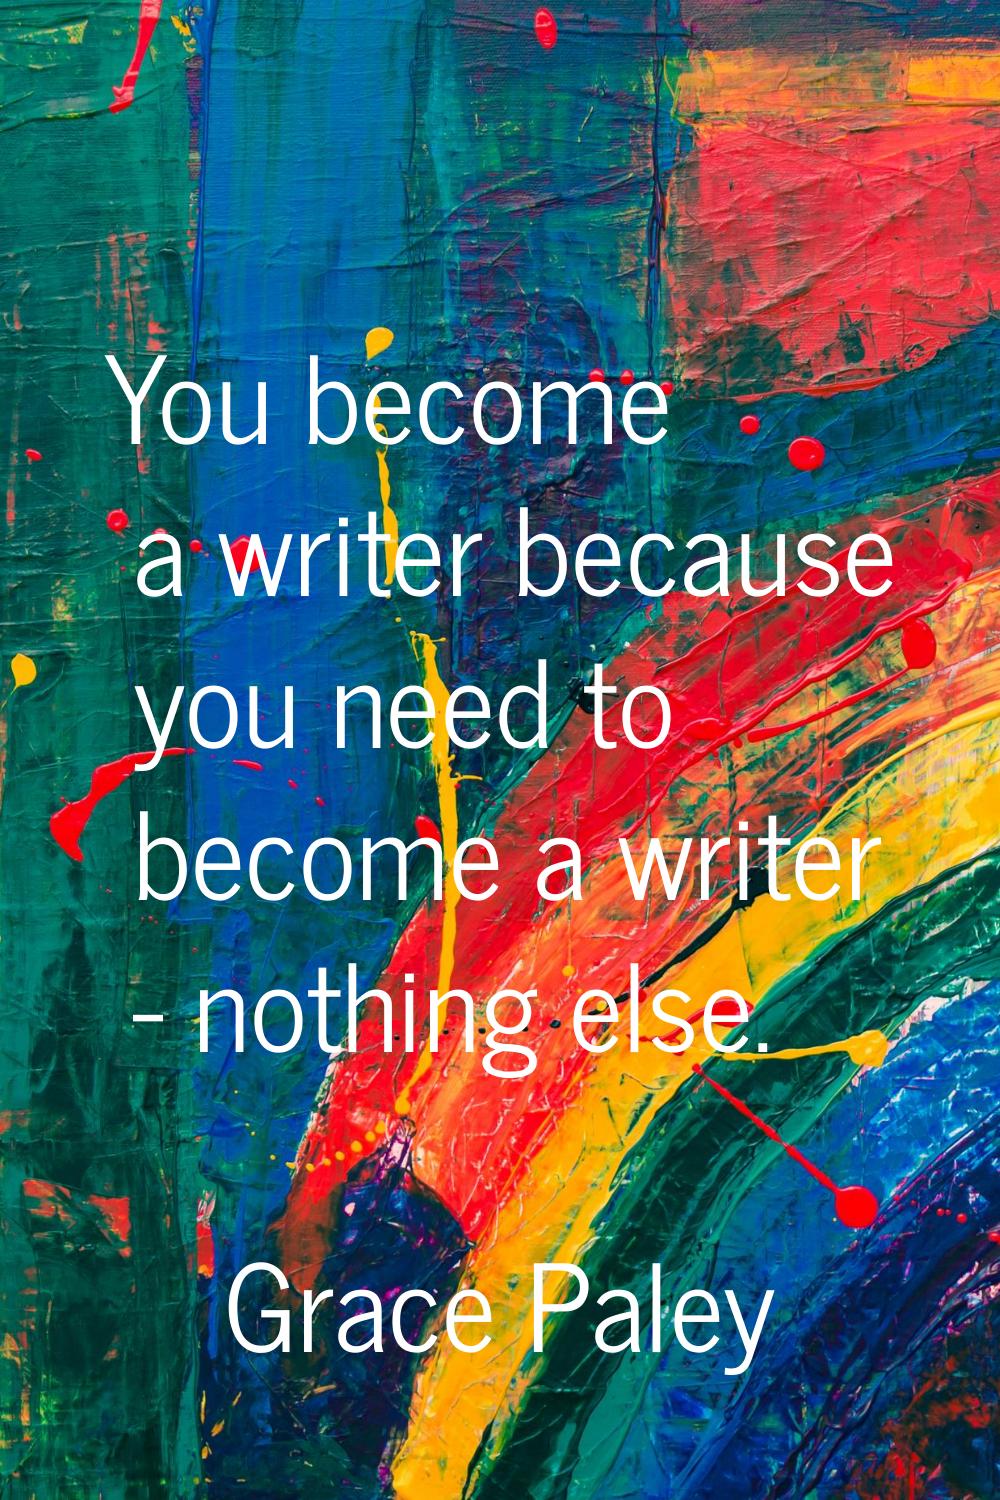 You become a writer because you need to become a writer - nothing else.